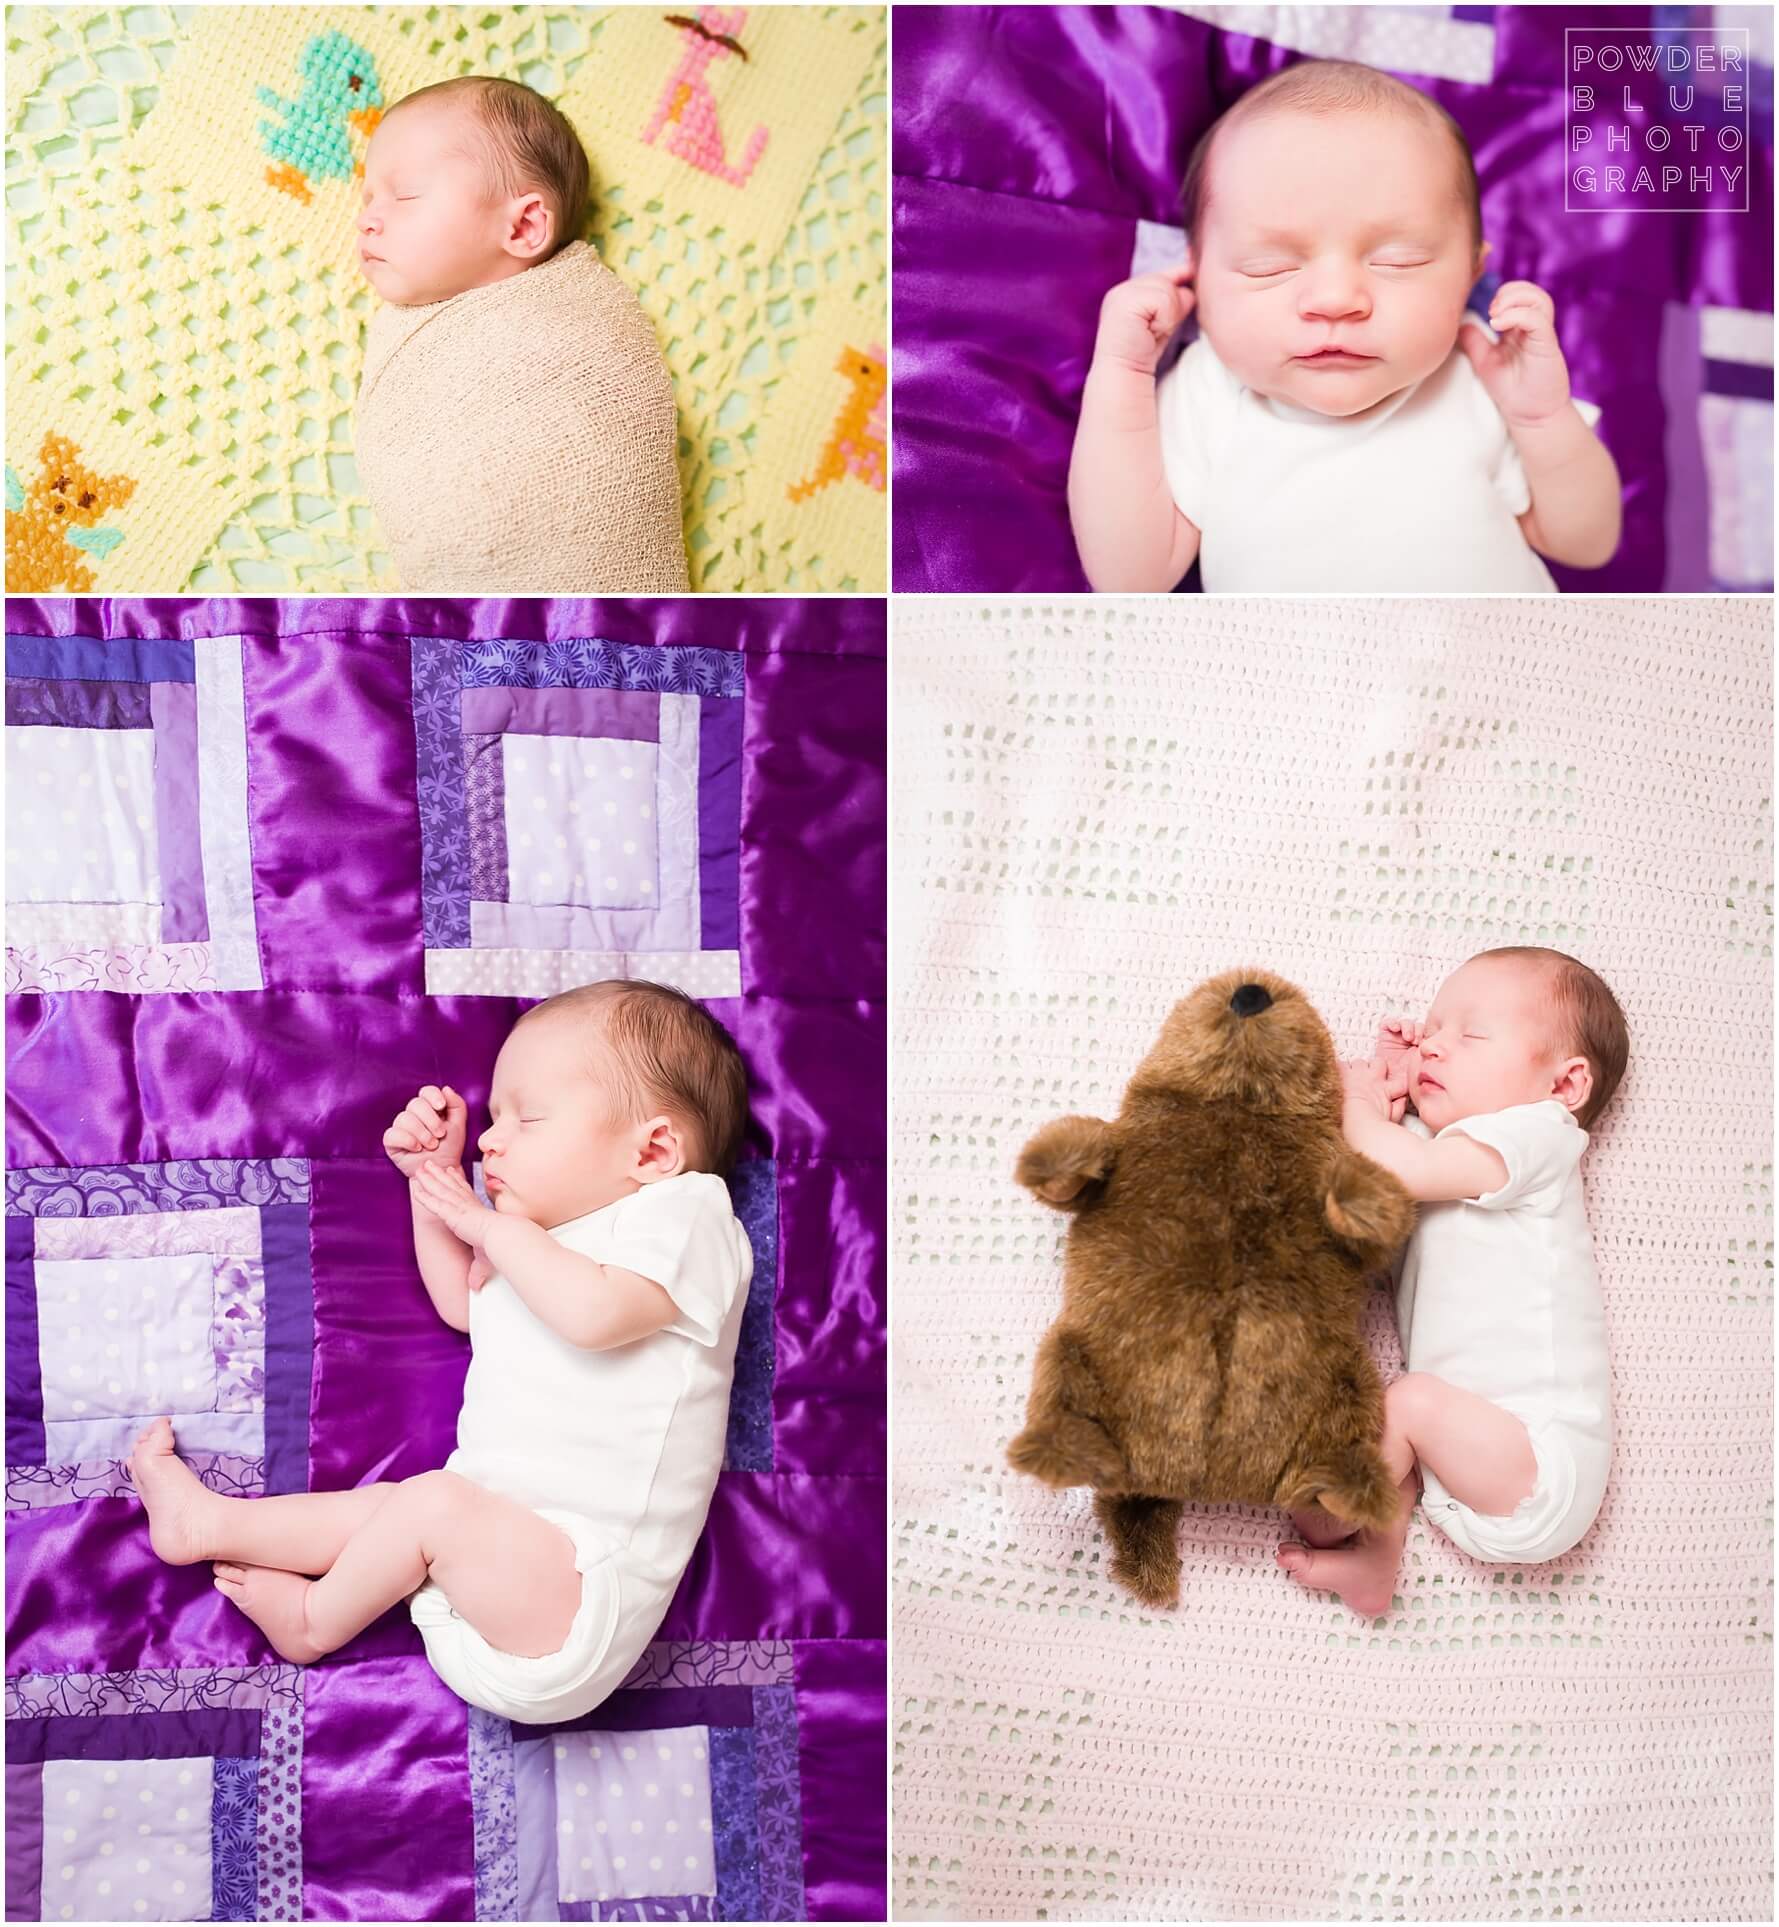 lifestyle newborn session in home colorful blankets pittsburgh